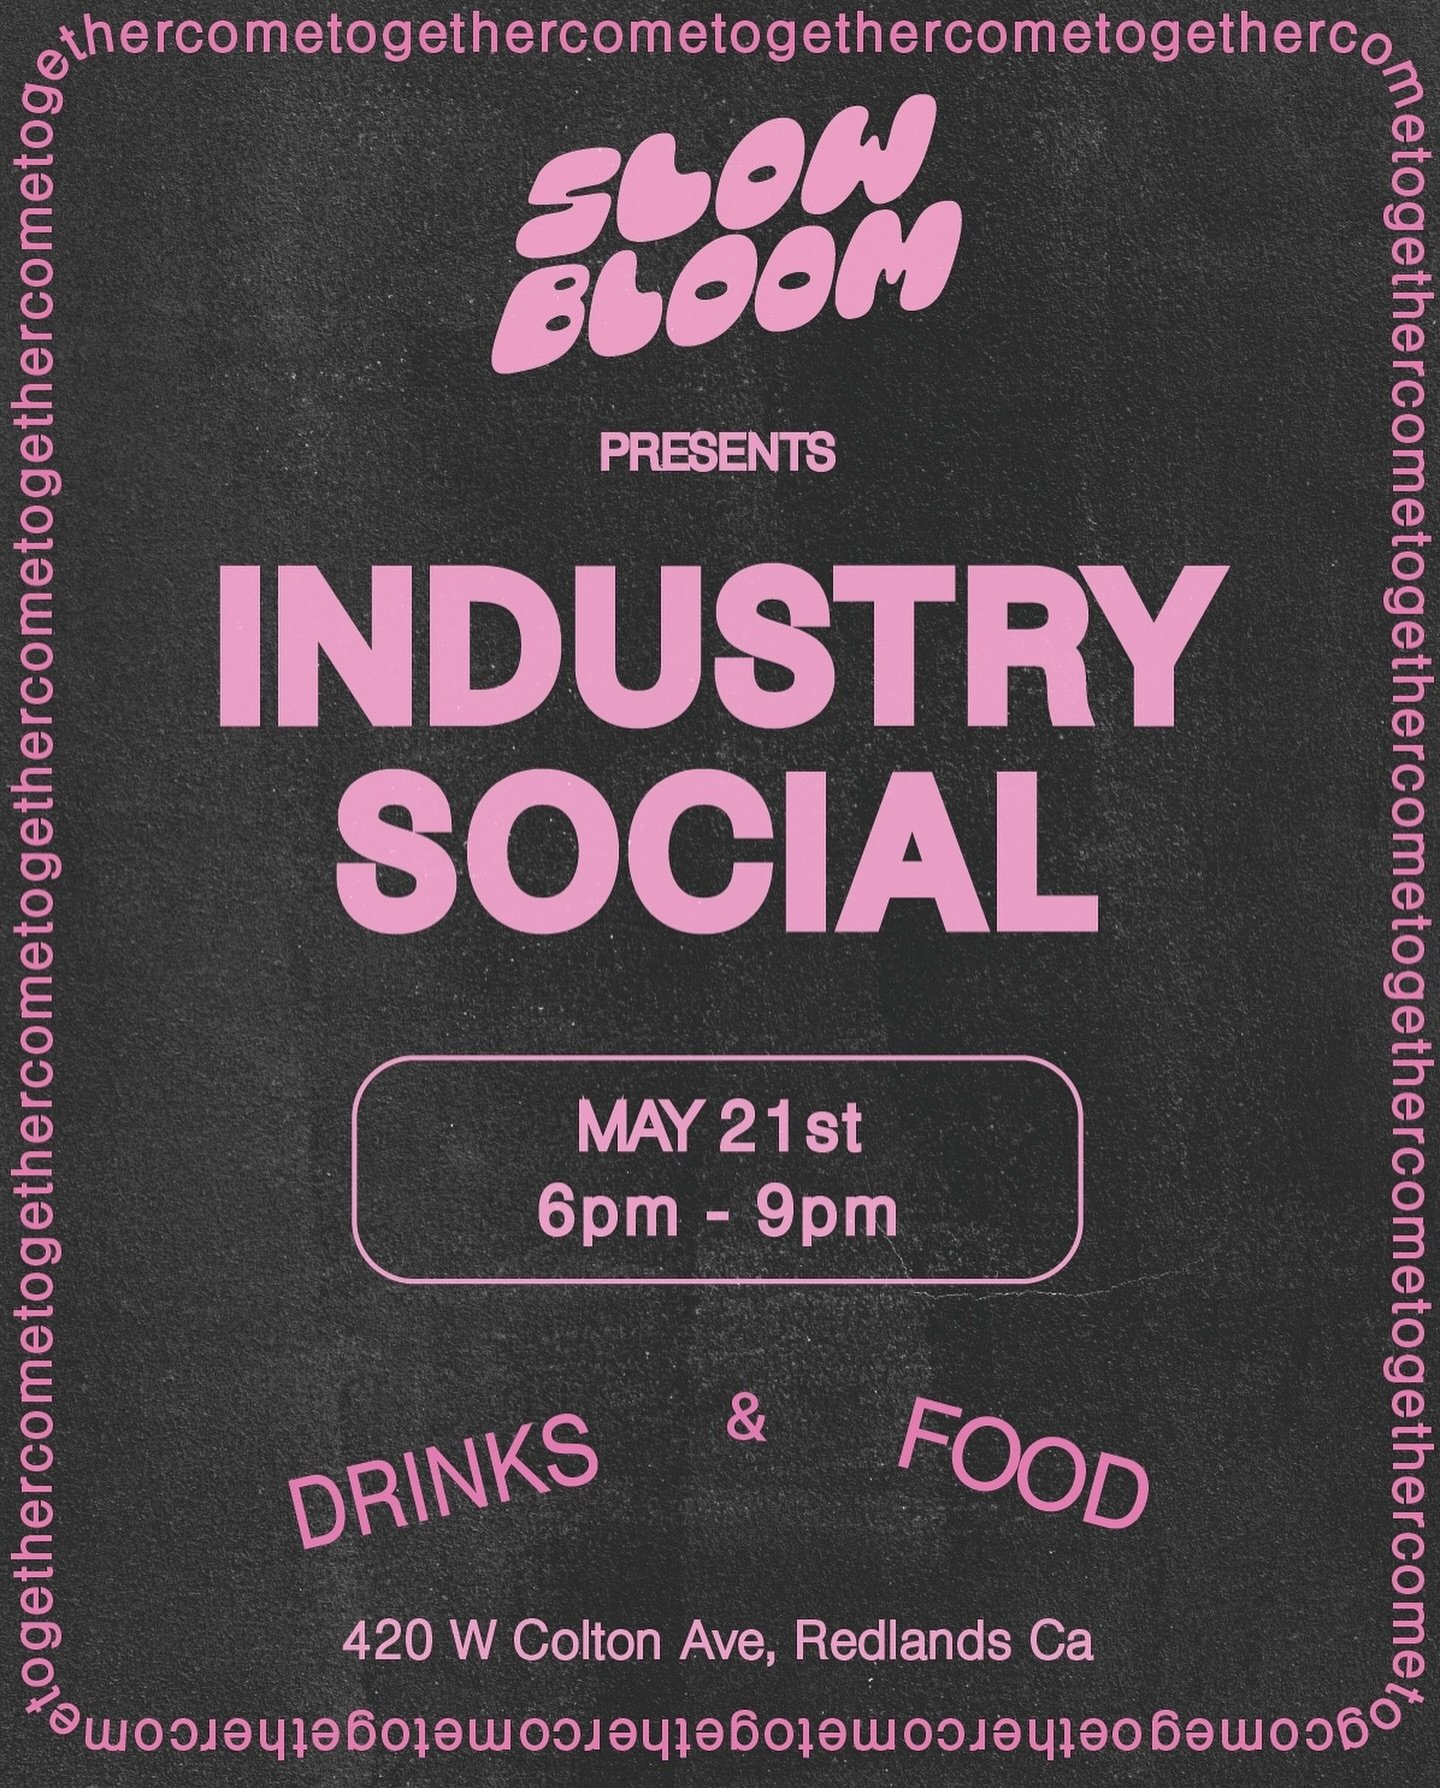 Our second industry social is coming up May 21st! If you&rsquo;re in the IE service industry we encourage you to come out and meet some new friends! Food and beverages will be up for sale starting at 6pm😌
(Menus will be posted throughout the week)
H